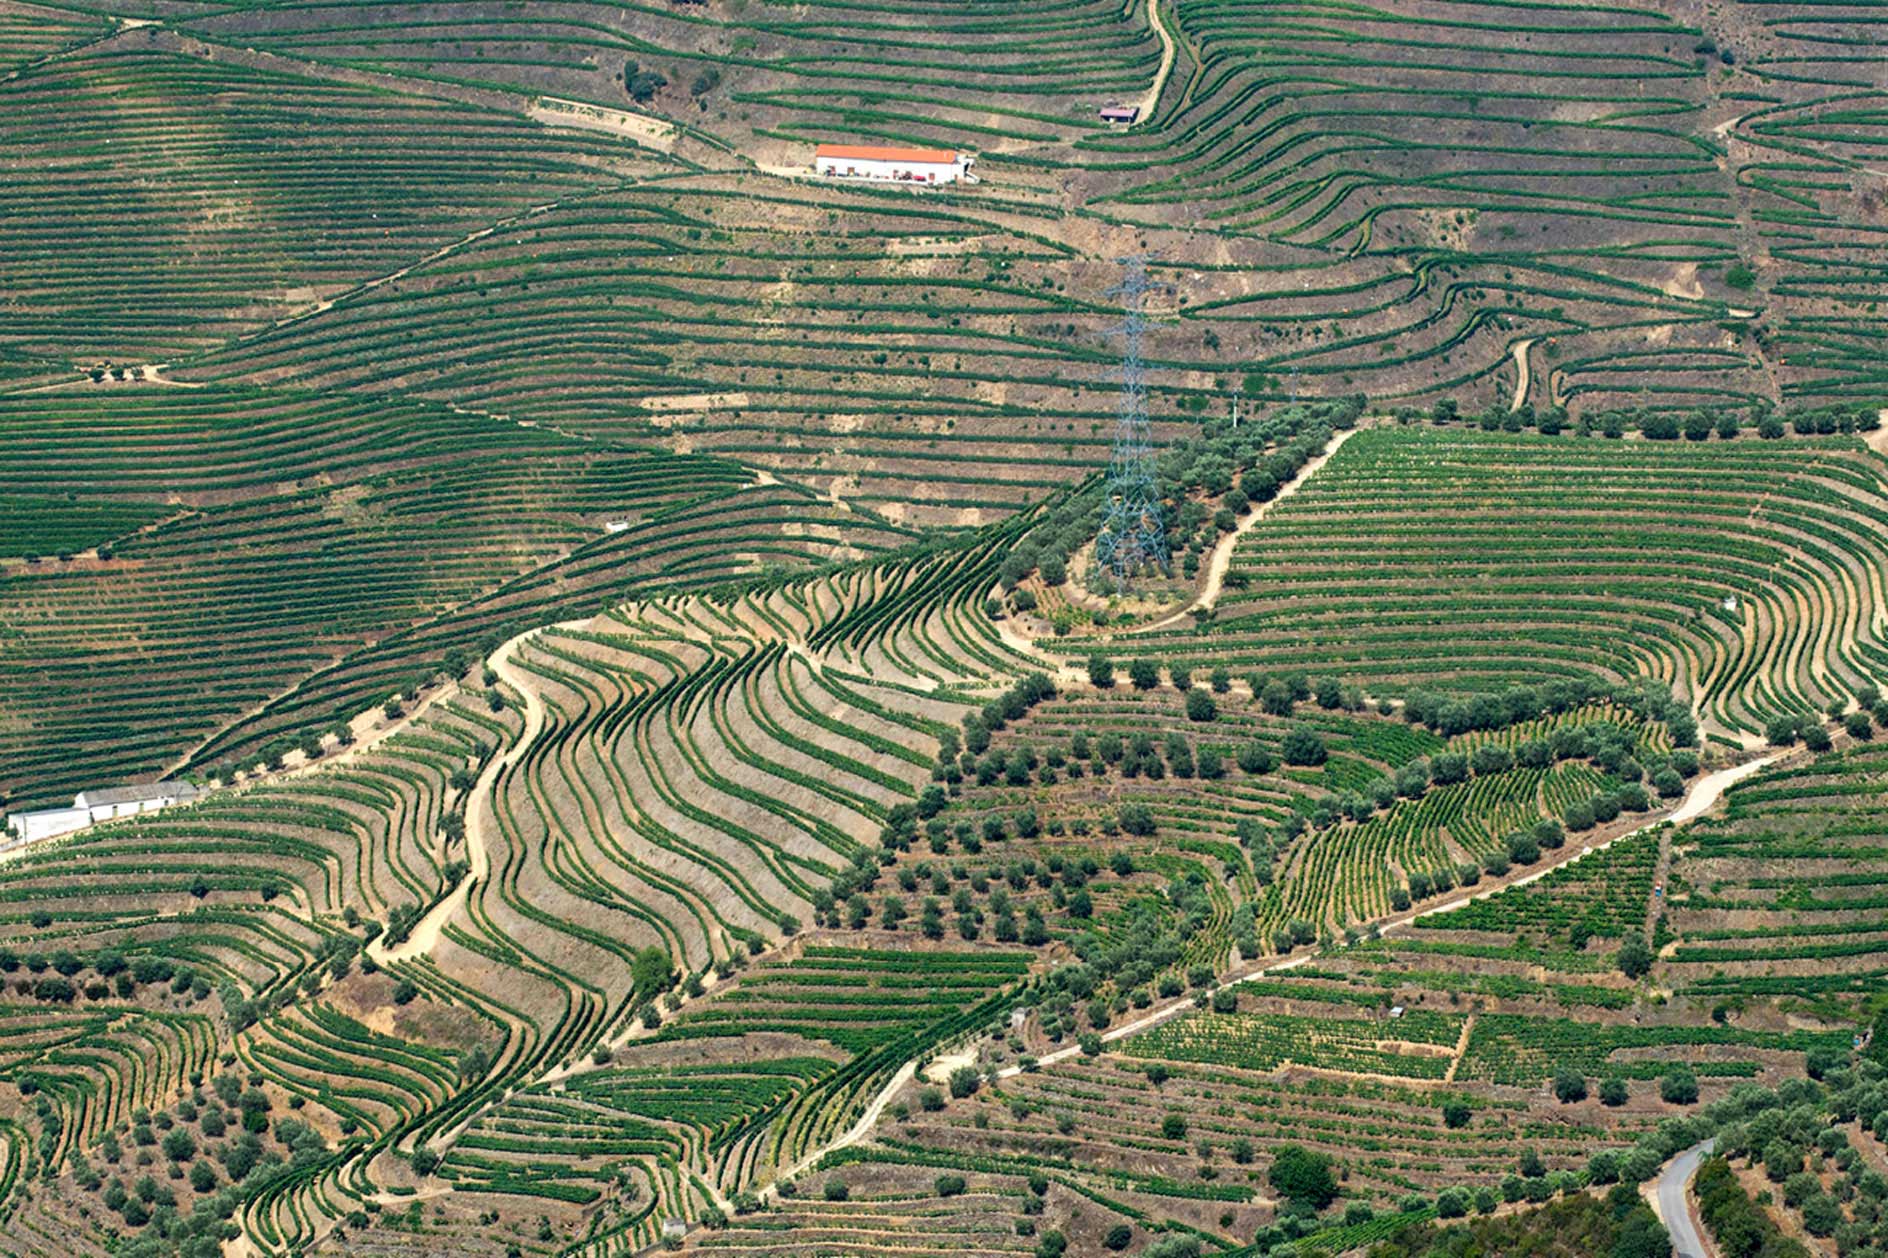 Douro Landscape, from Whotrips.com